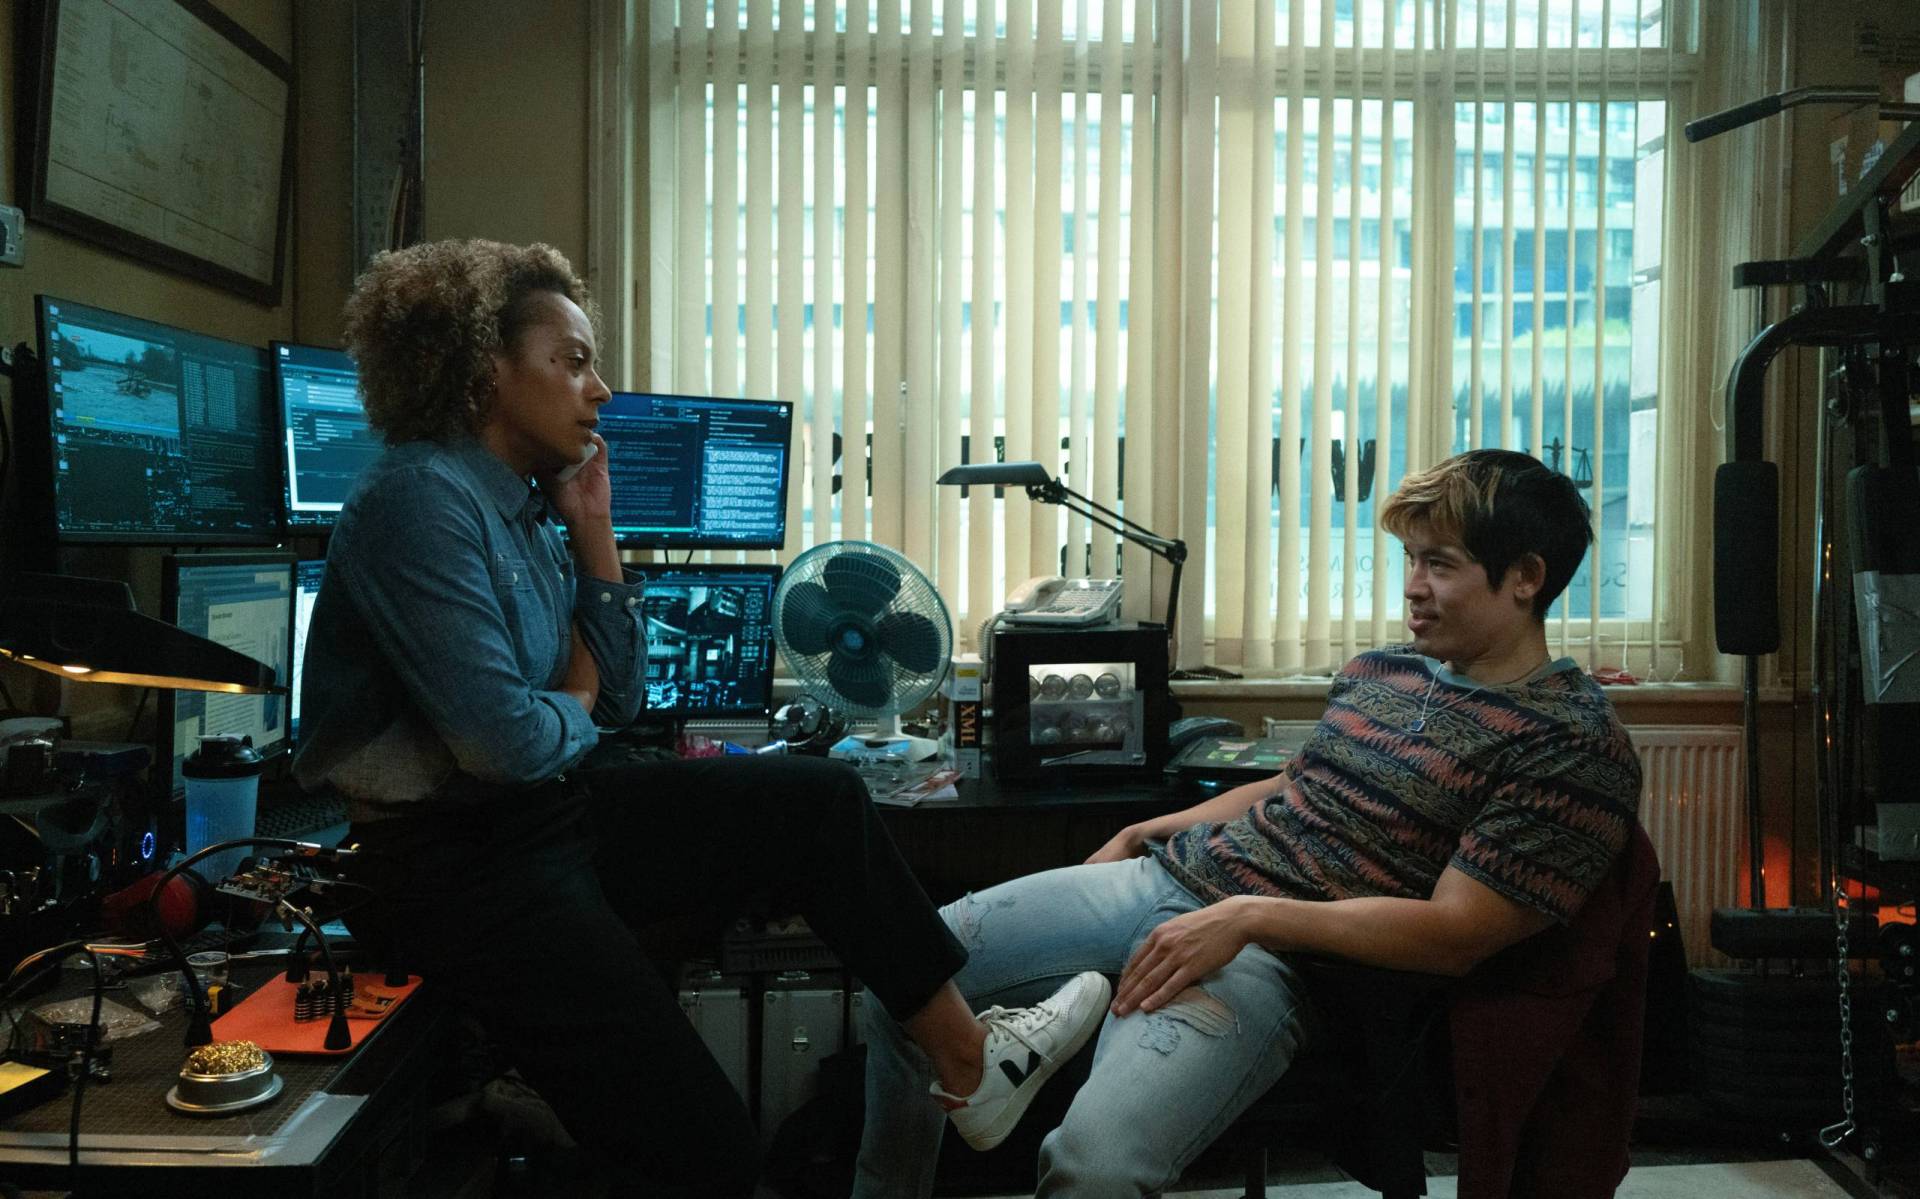 A young man wearing jeans and a T-shirt sits slouched in an office chair facing a young Black woman who is perched on a desk. Between them is computer equipment and a fan.